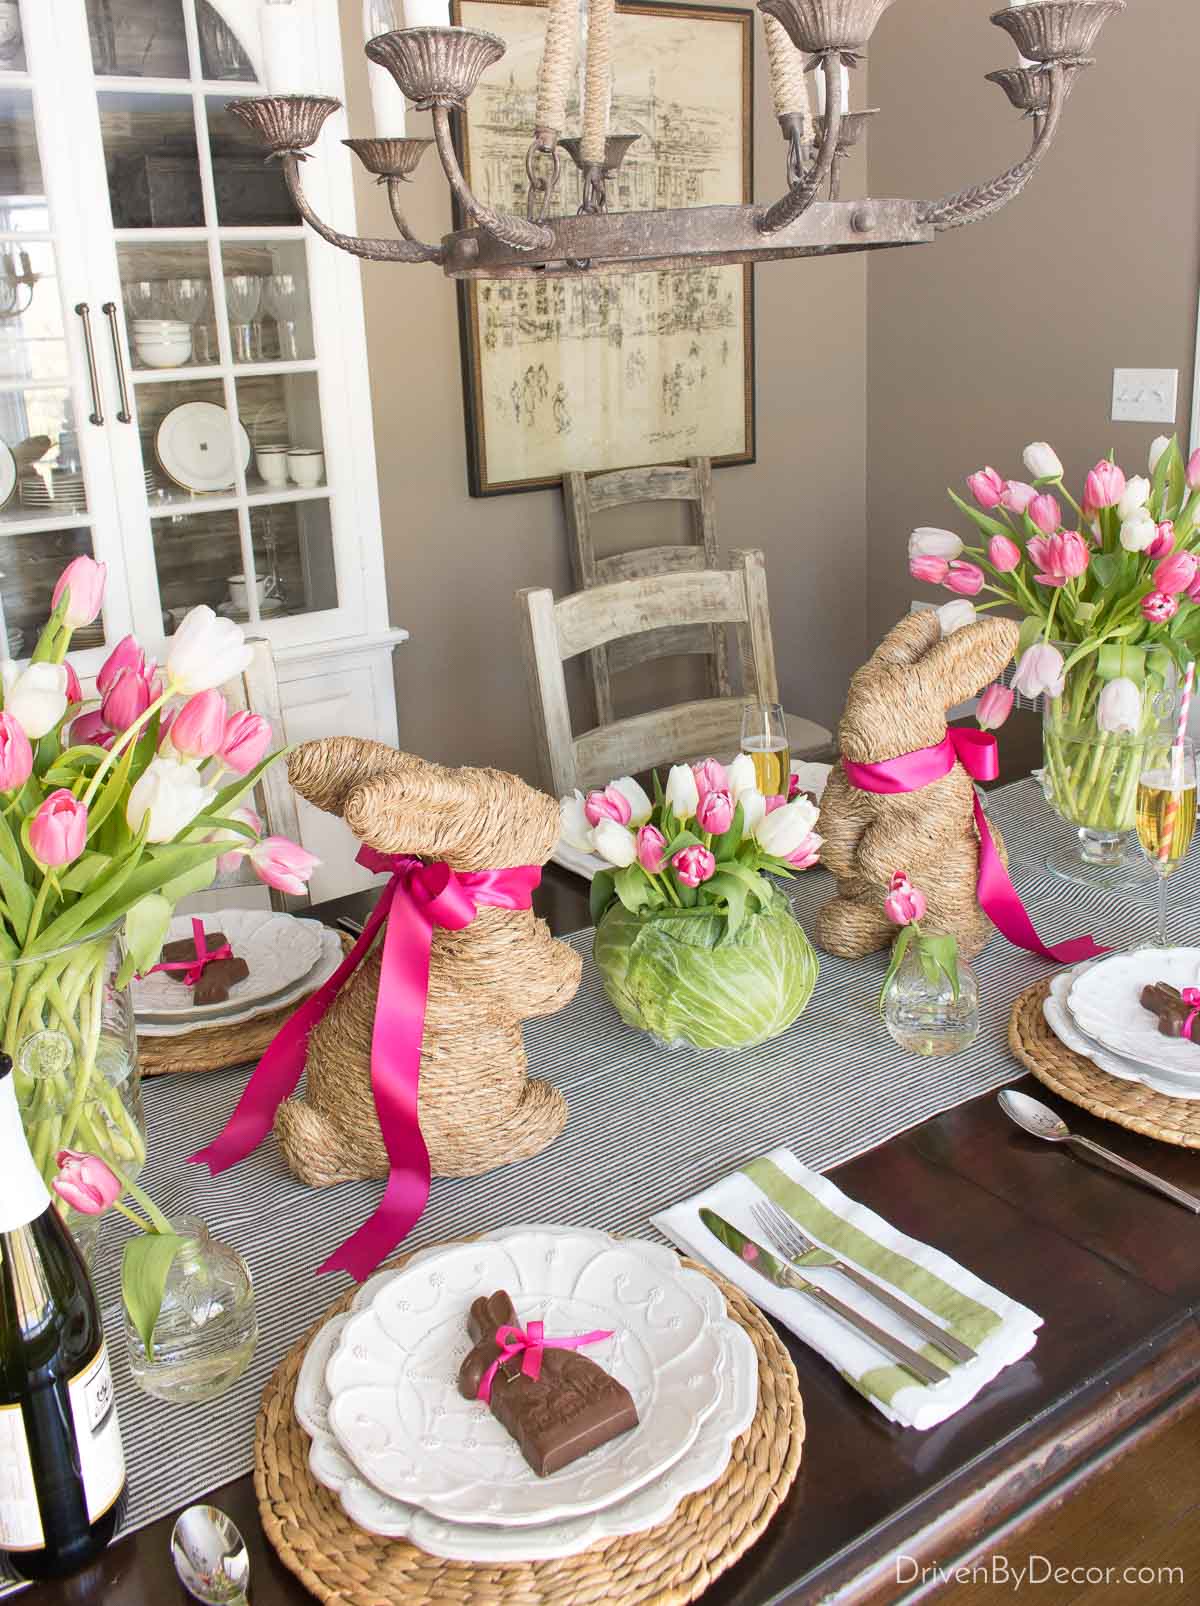 Centerpiece with twine bunnies and tulips